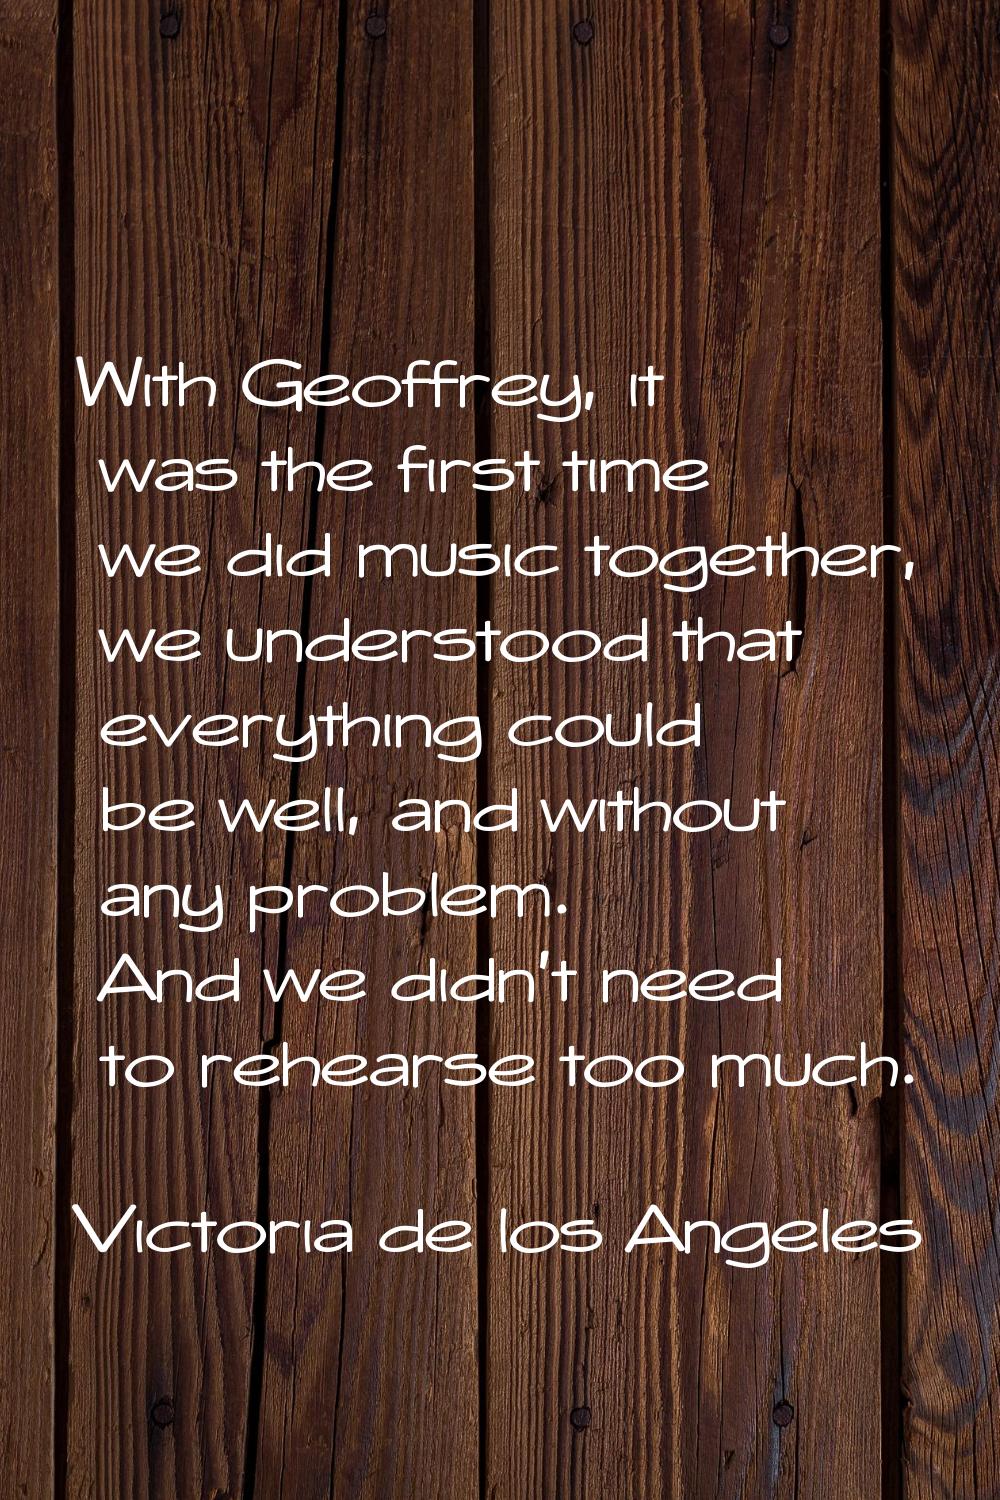 With Geoffrey, it was the first time we did music together, we understood that everything could be 